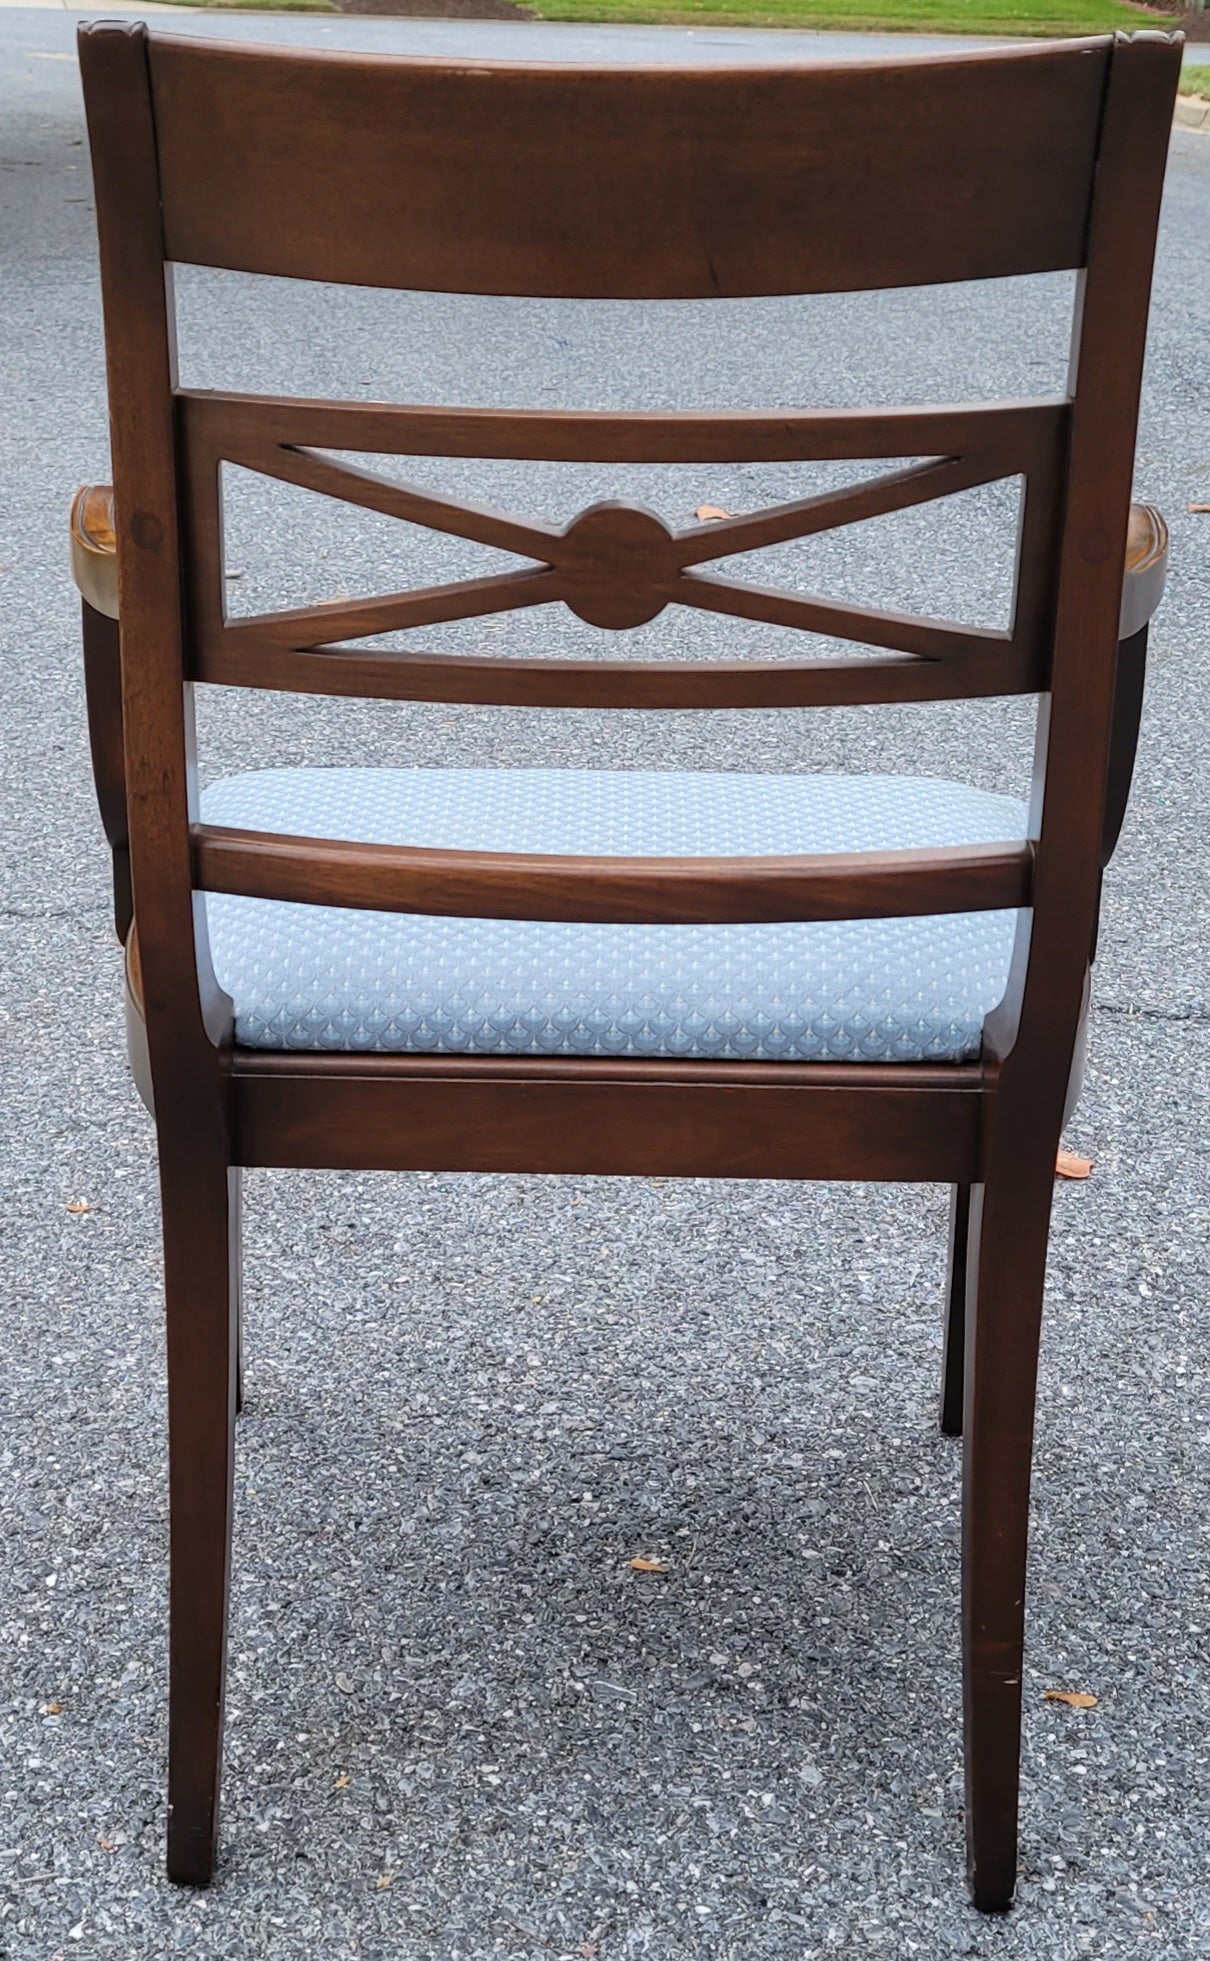 1920s Estey Manufacturing Magogany Upholstered Arm Chairs In Good Condition For Sale In Germantown, MD